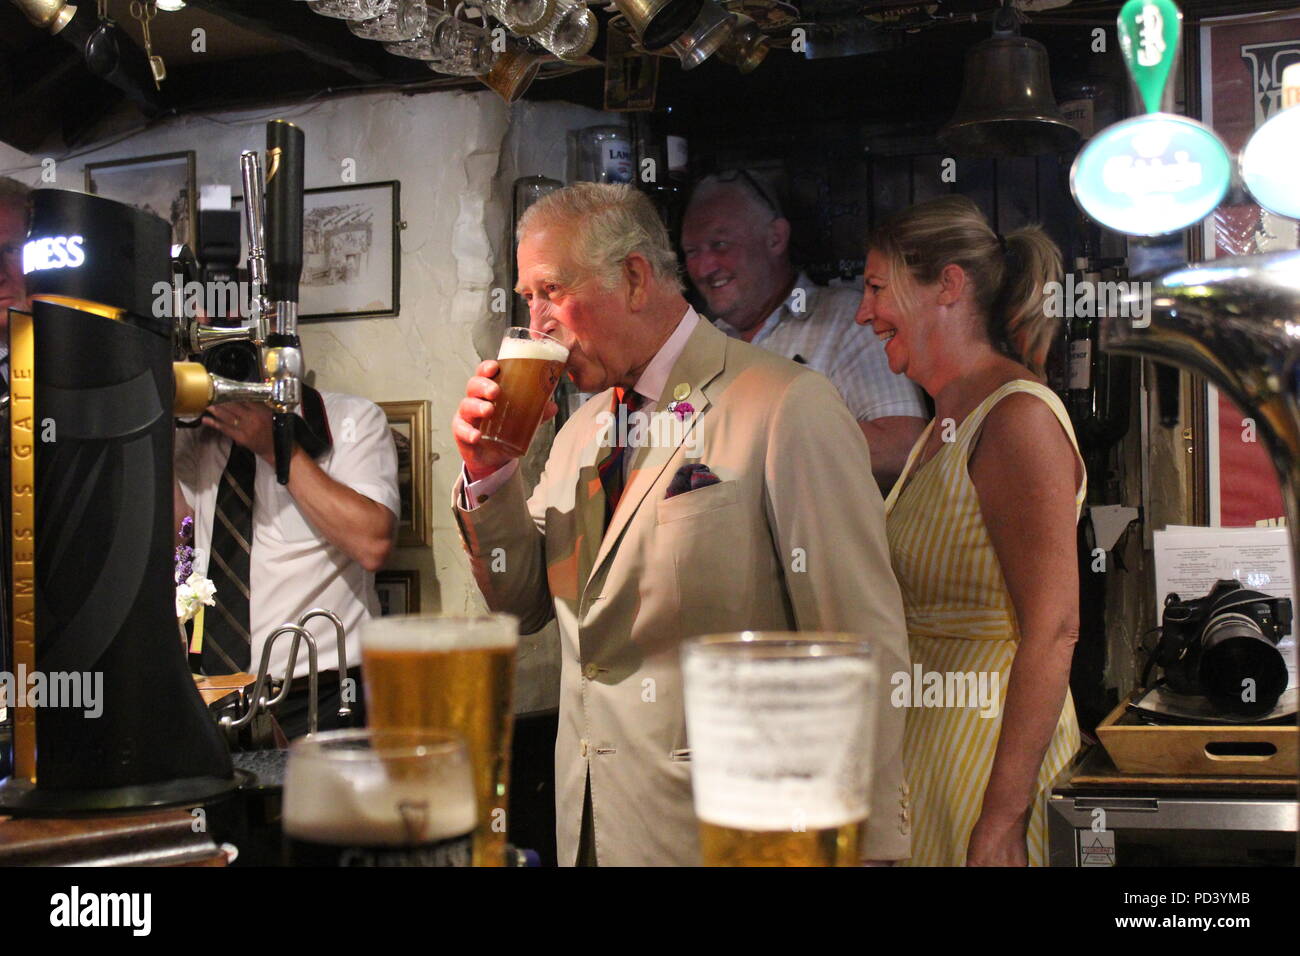 Prince Charles visits St Digain Church in Llangernyw in Wales and pops in The Old Stag pub for a quick pint, which he pours himself.  Featuring: Prince Charles Where: LLangernyw, United Kingdom When: 06 Jul 2018 Credit: WENN.com Stock Photo